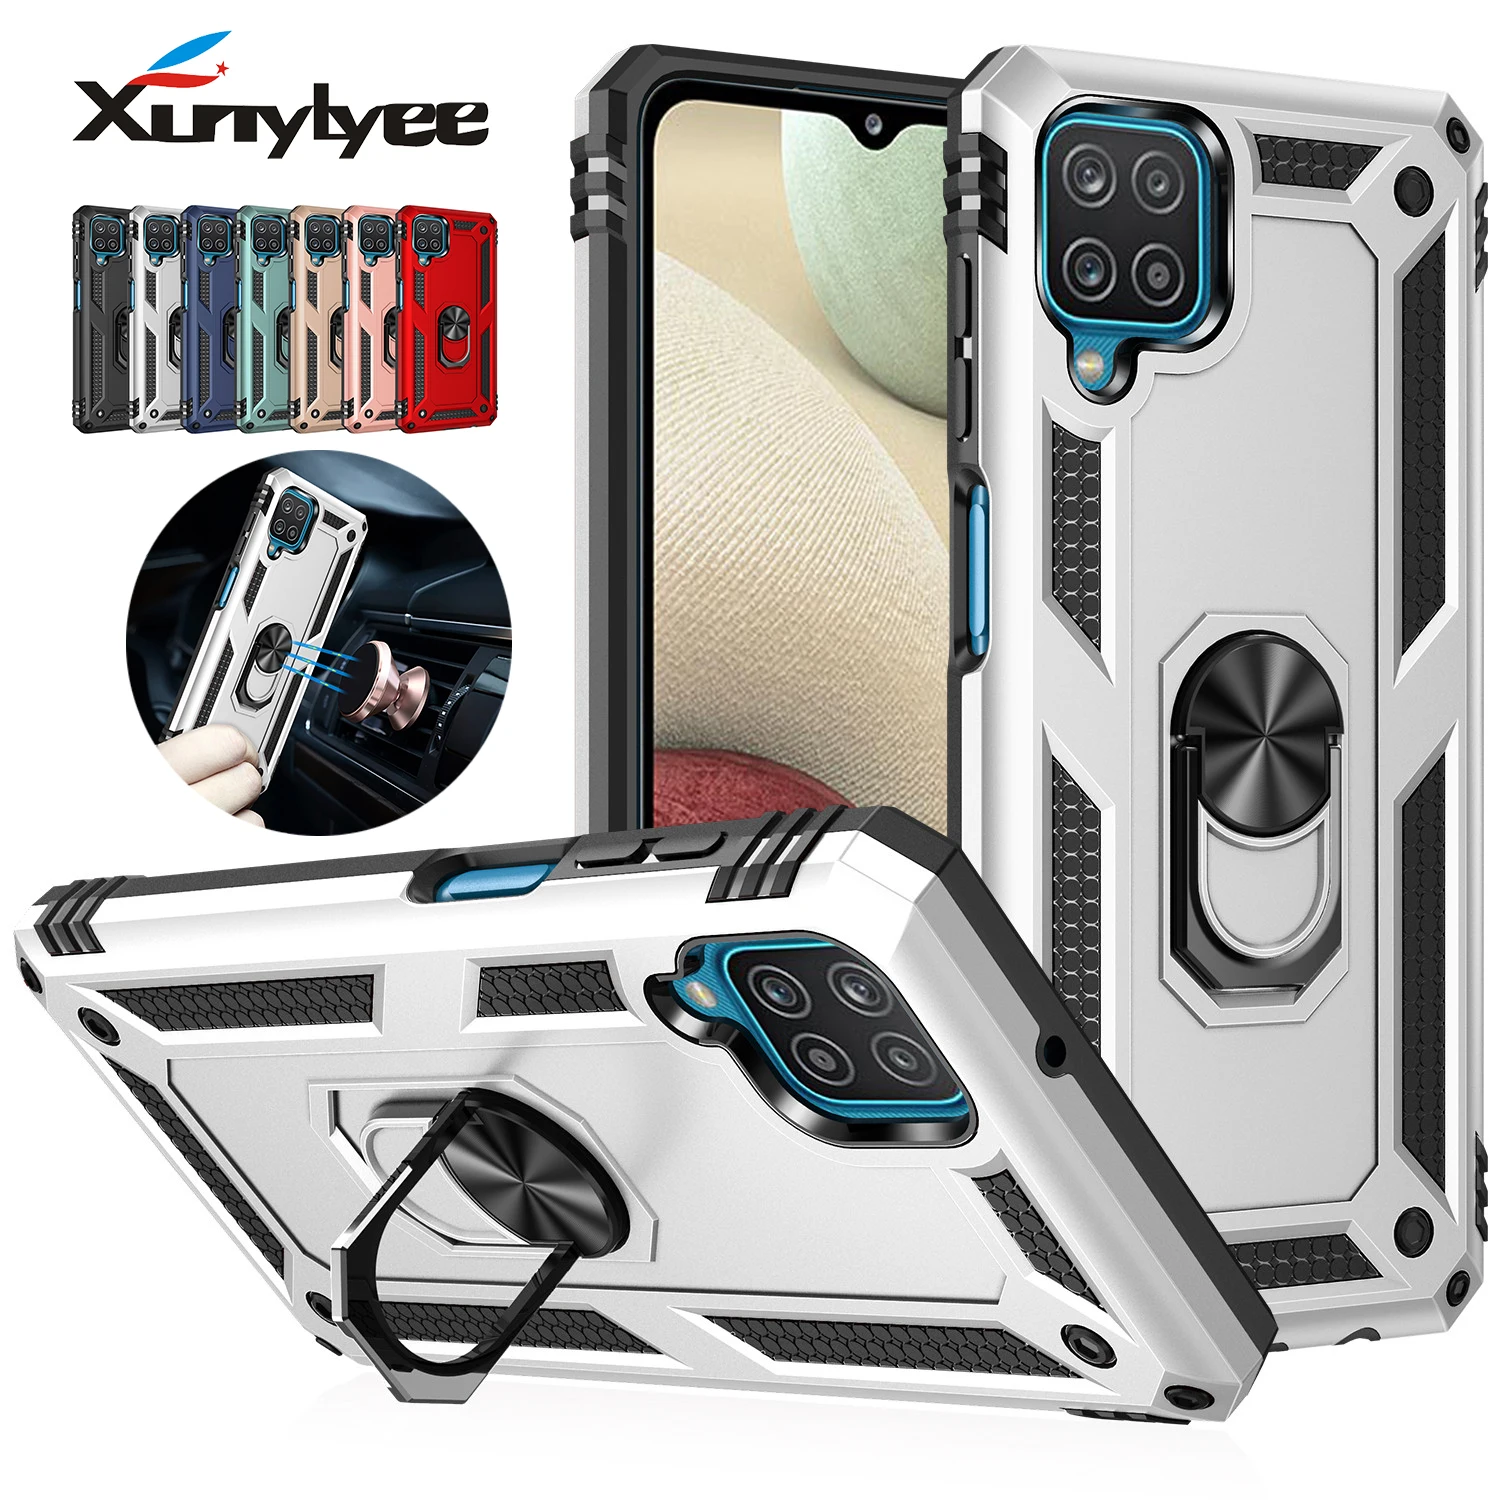 

XunyLyee Case for Samsung Galaxy S21 Ultra S22 Plus Note 20 Ultra S20 FE A52 A72 A12 A22 A31 Military Grade Bumpers Armor Cover